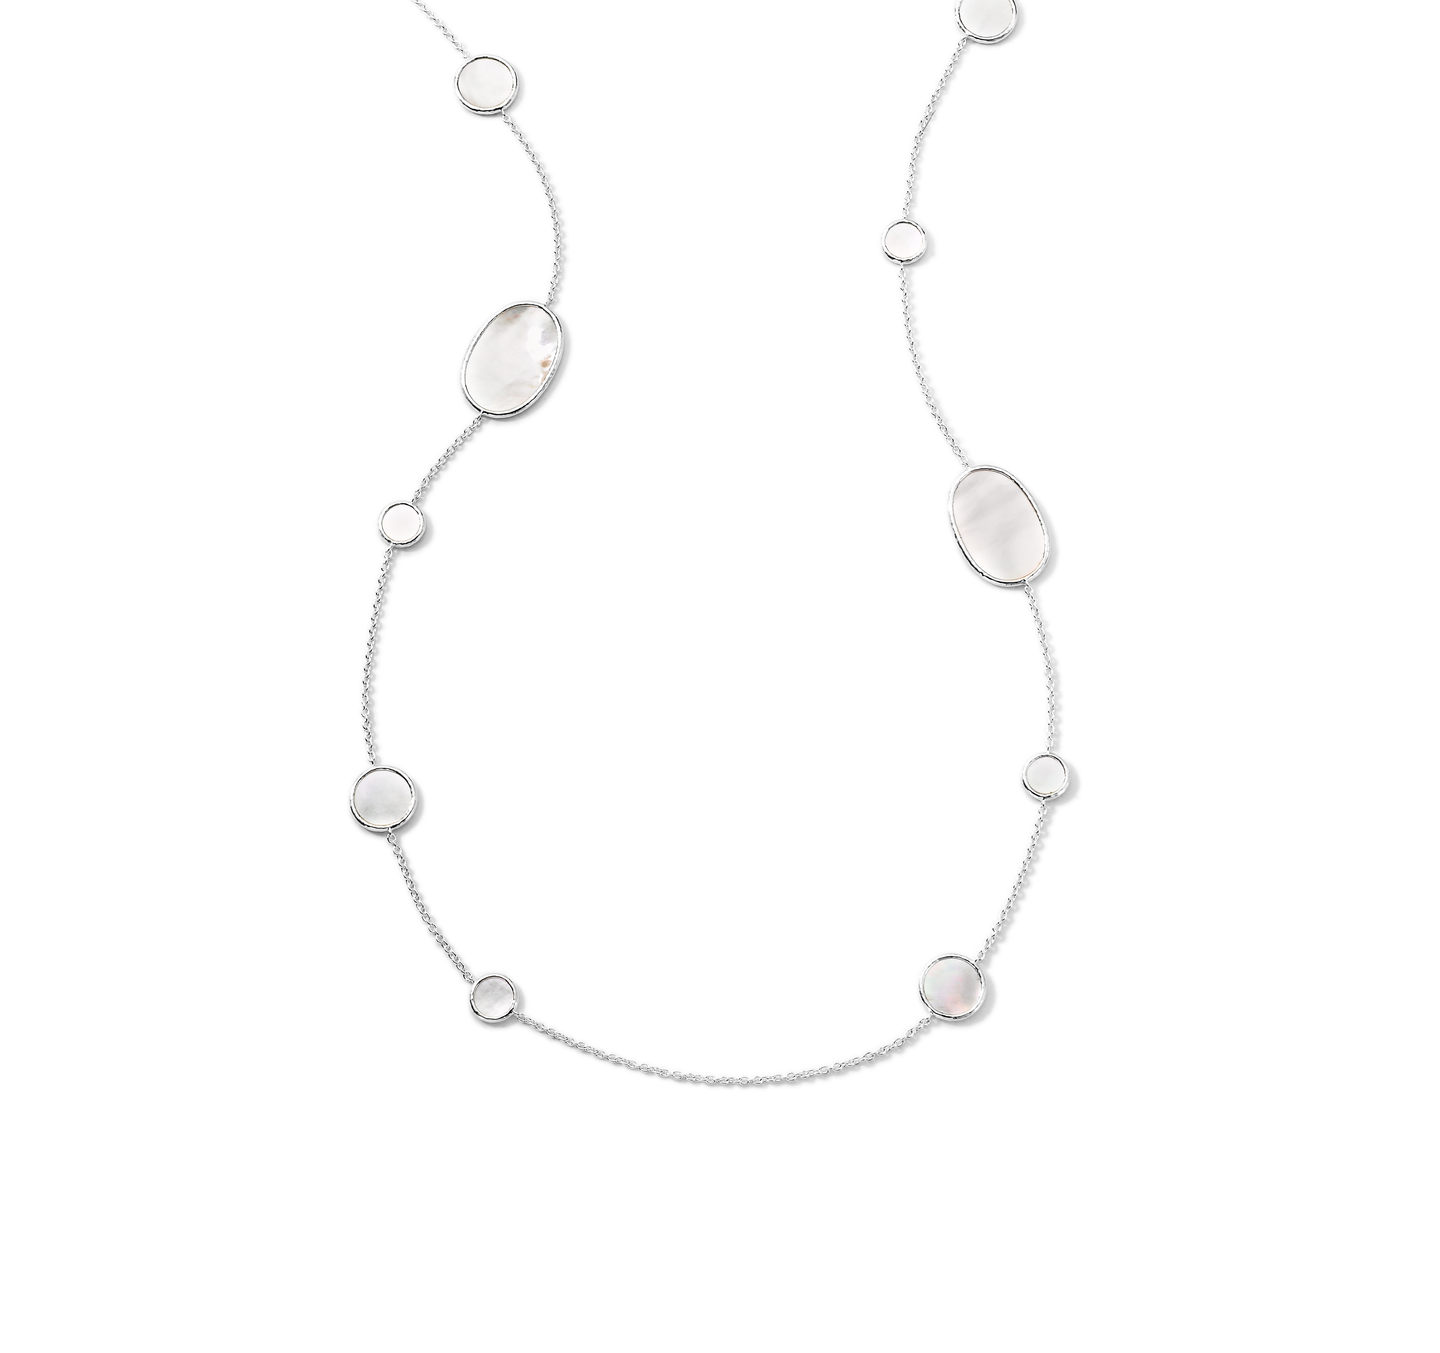 IPPOLITA Polished Rock Candy Oval Station Necklace in Mother-of-Pearl